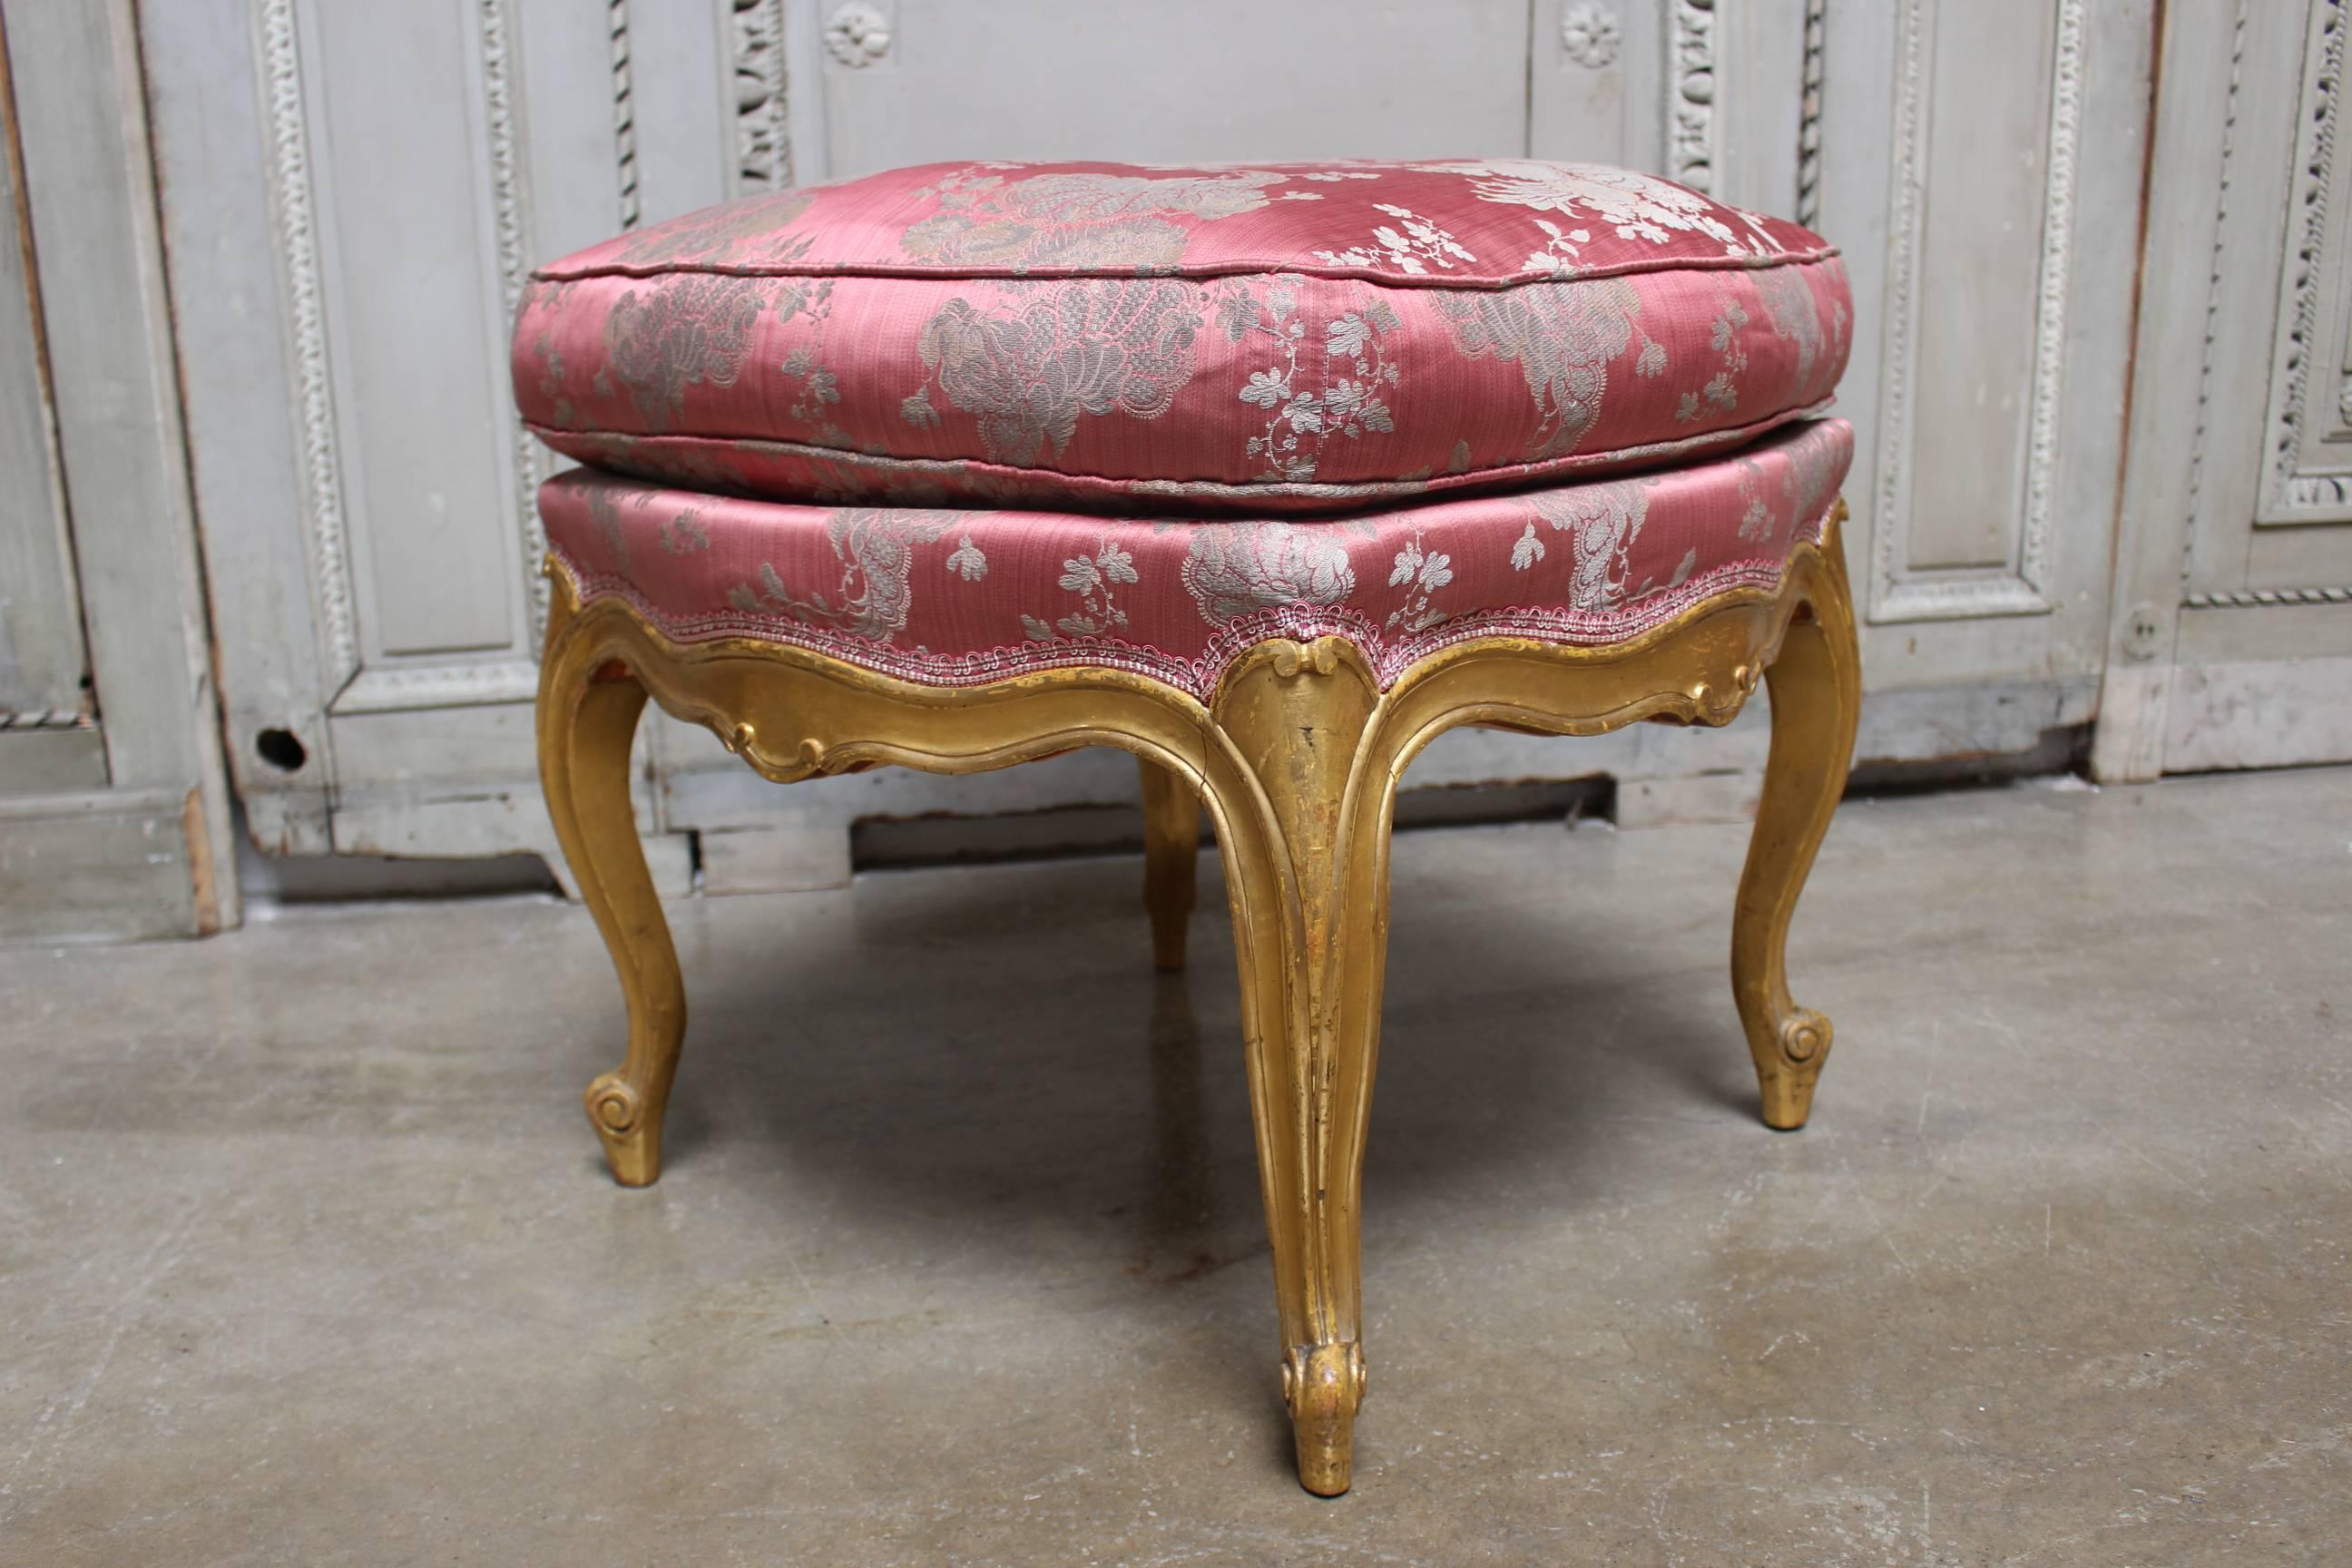 19th Century French Louis XV Style Tabouret with a Gold Leaf Finish